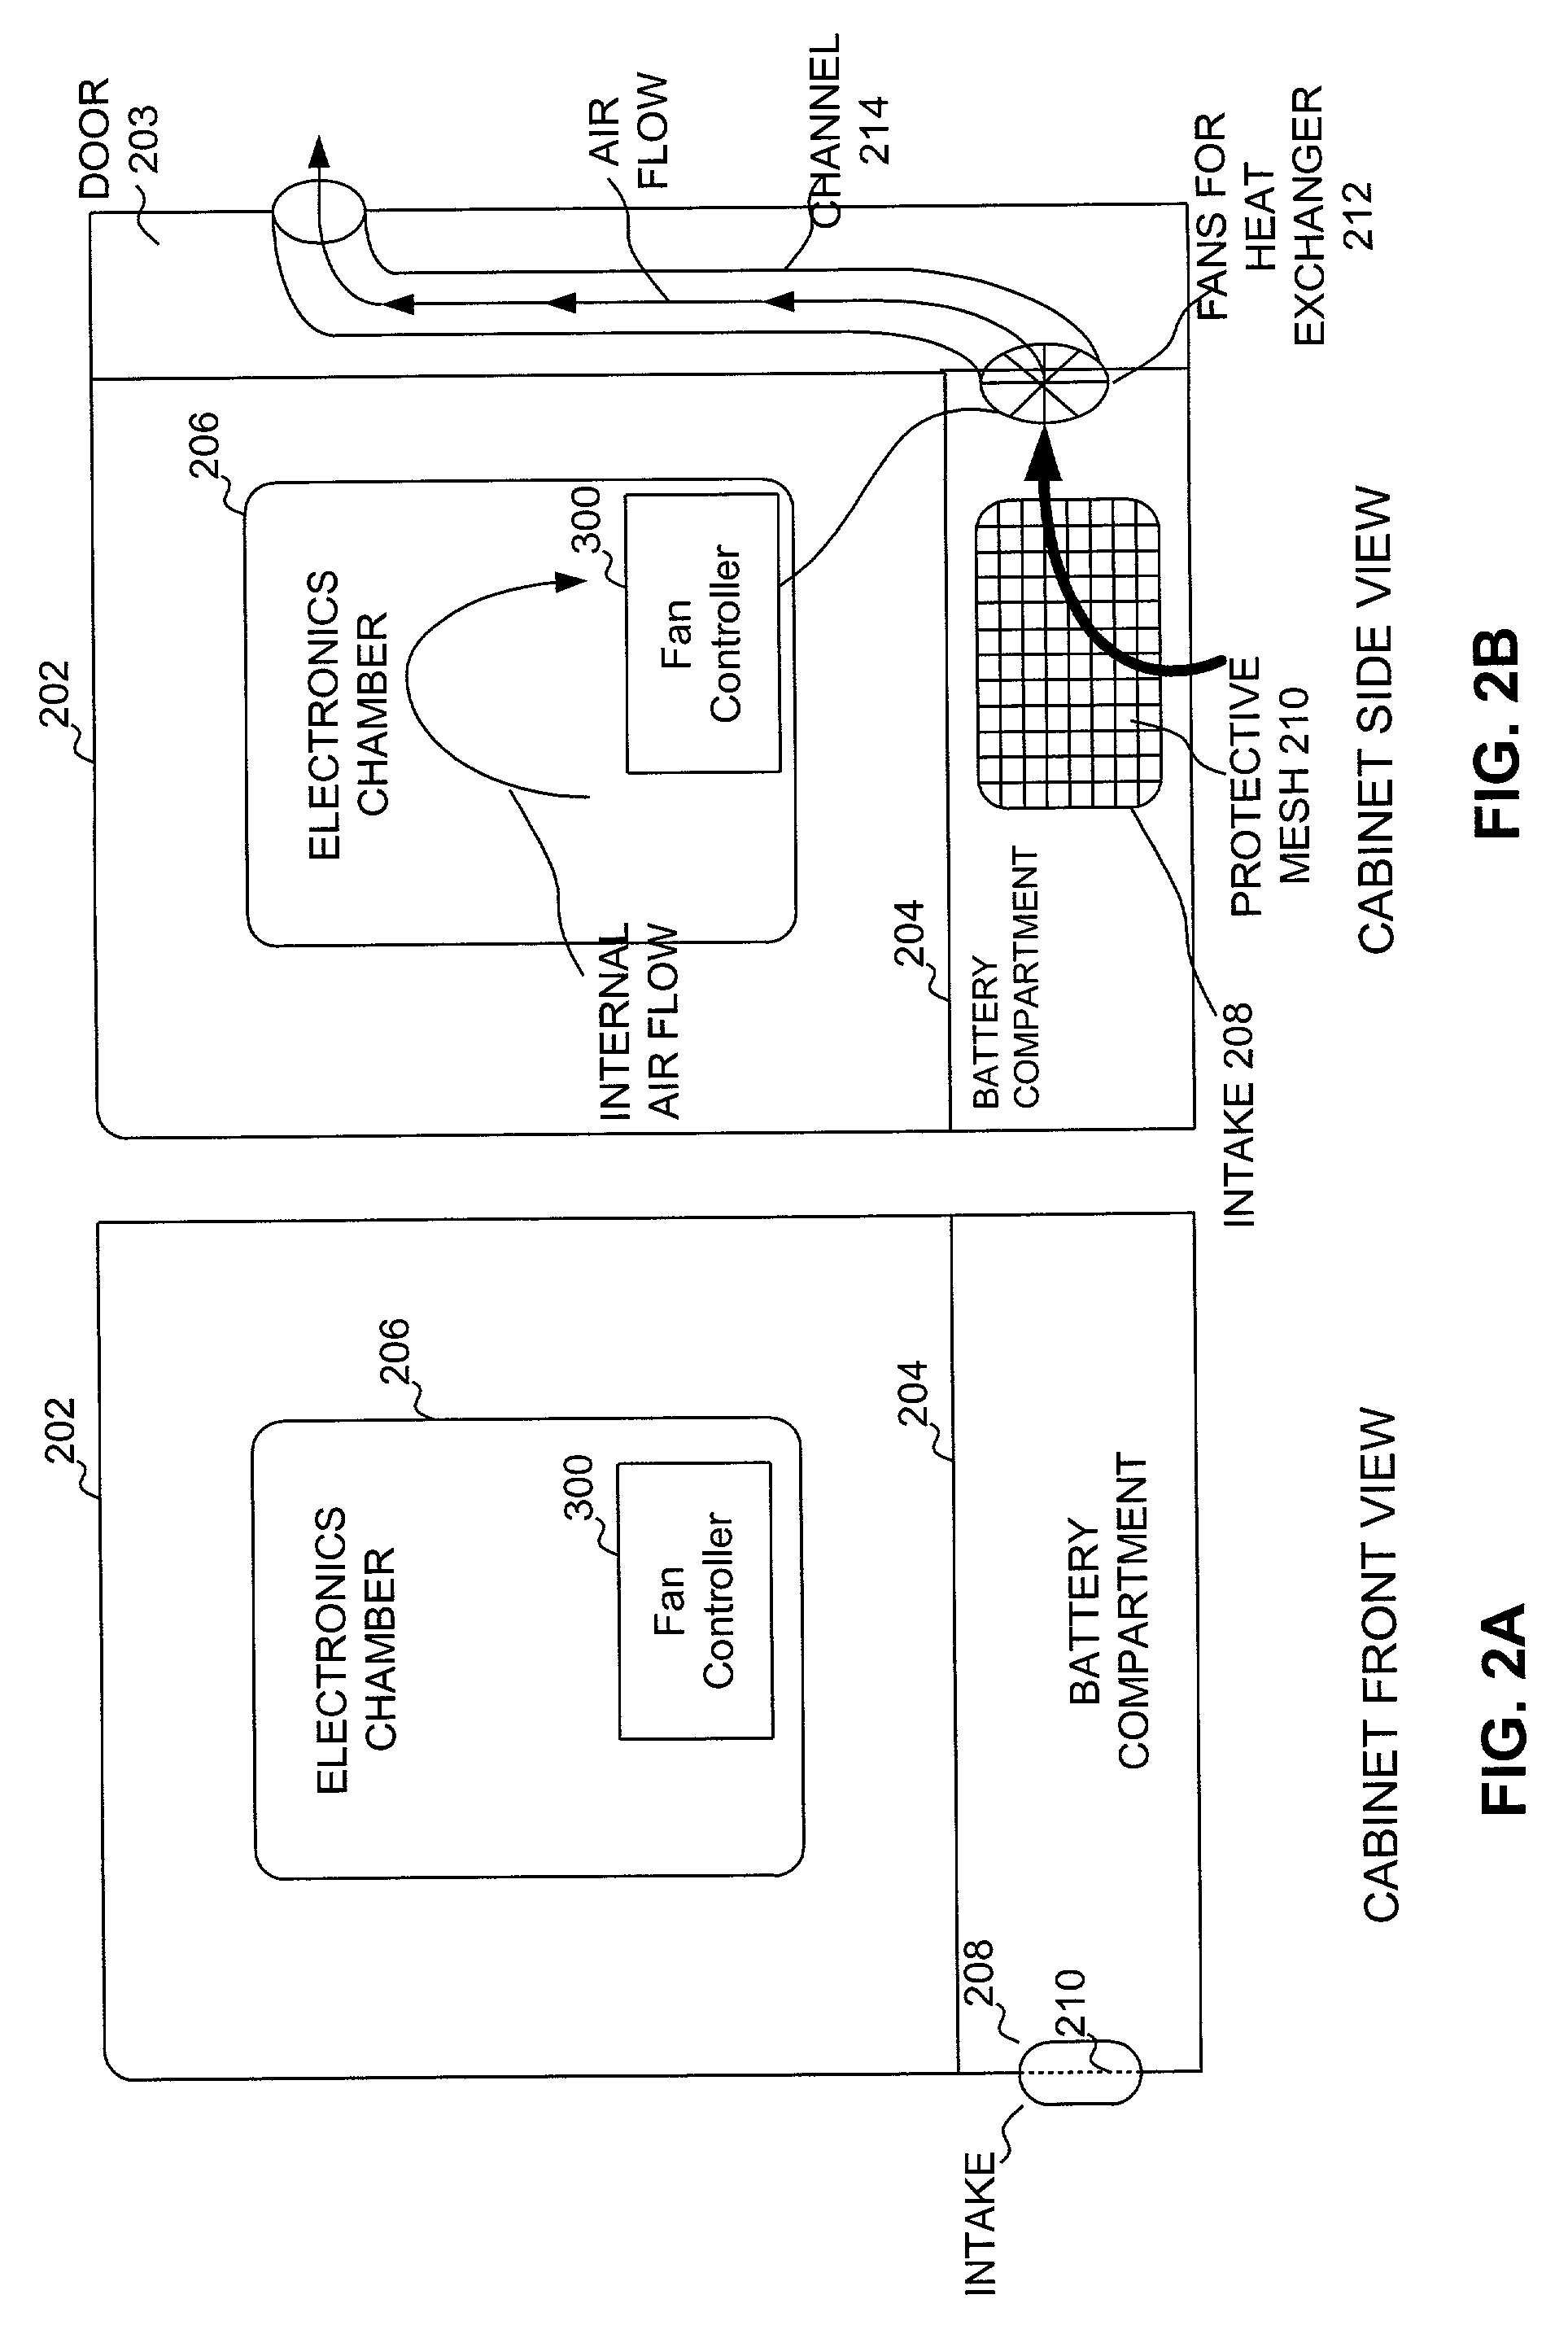 System and method for controlling heat exchanger fans